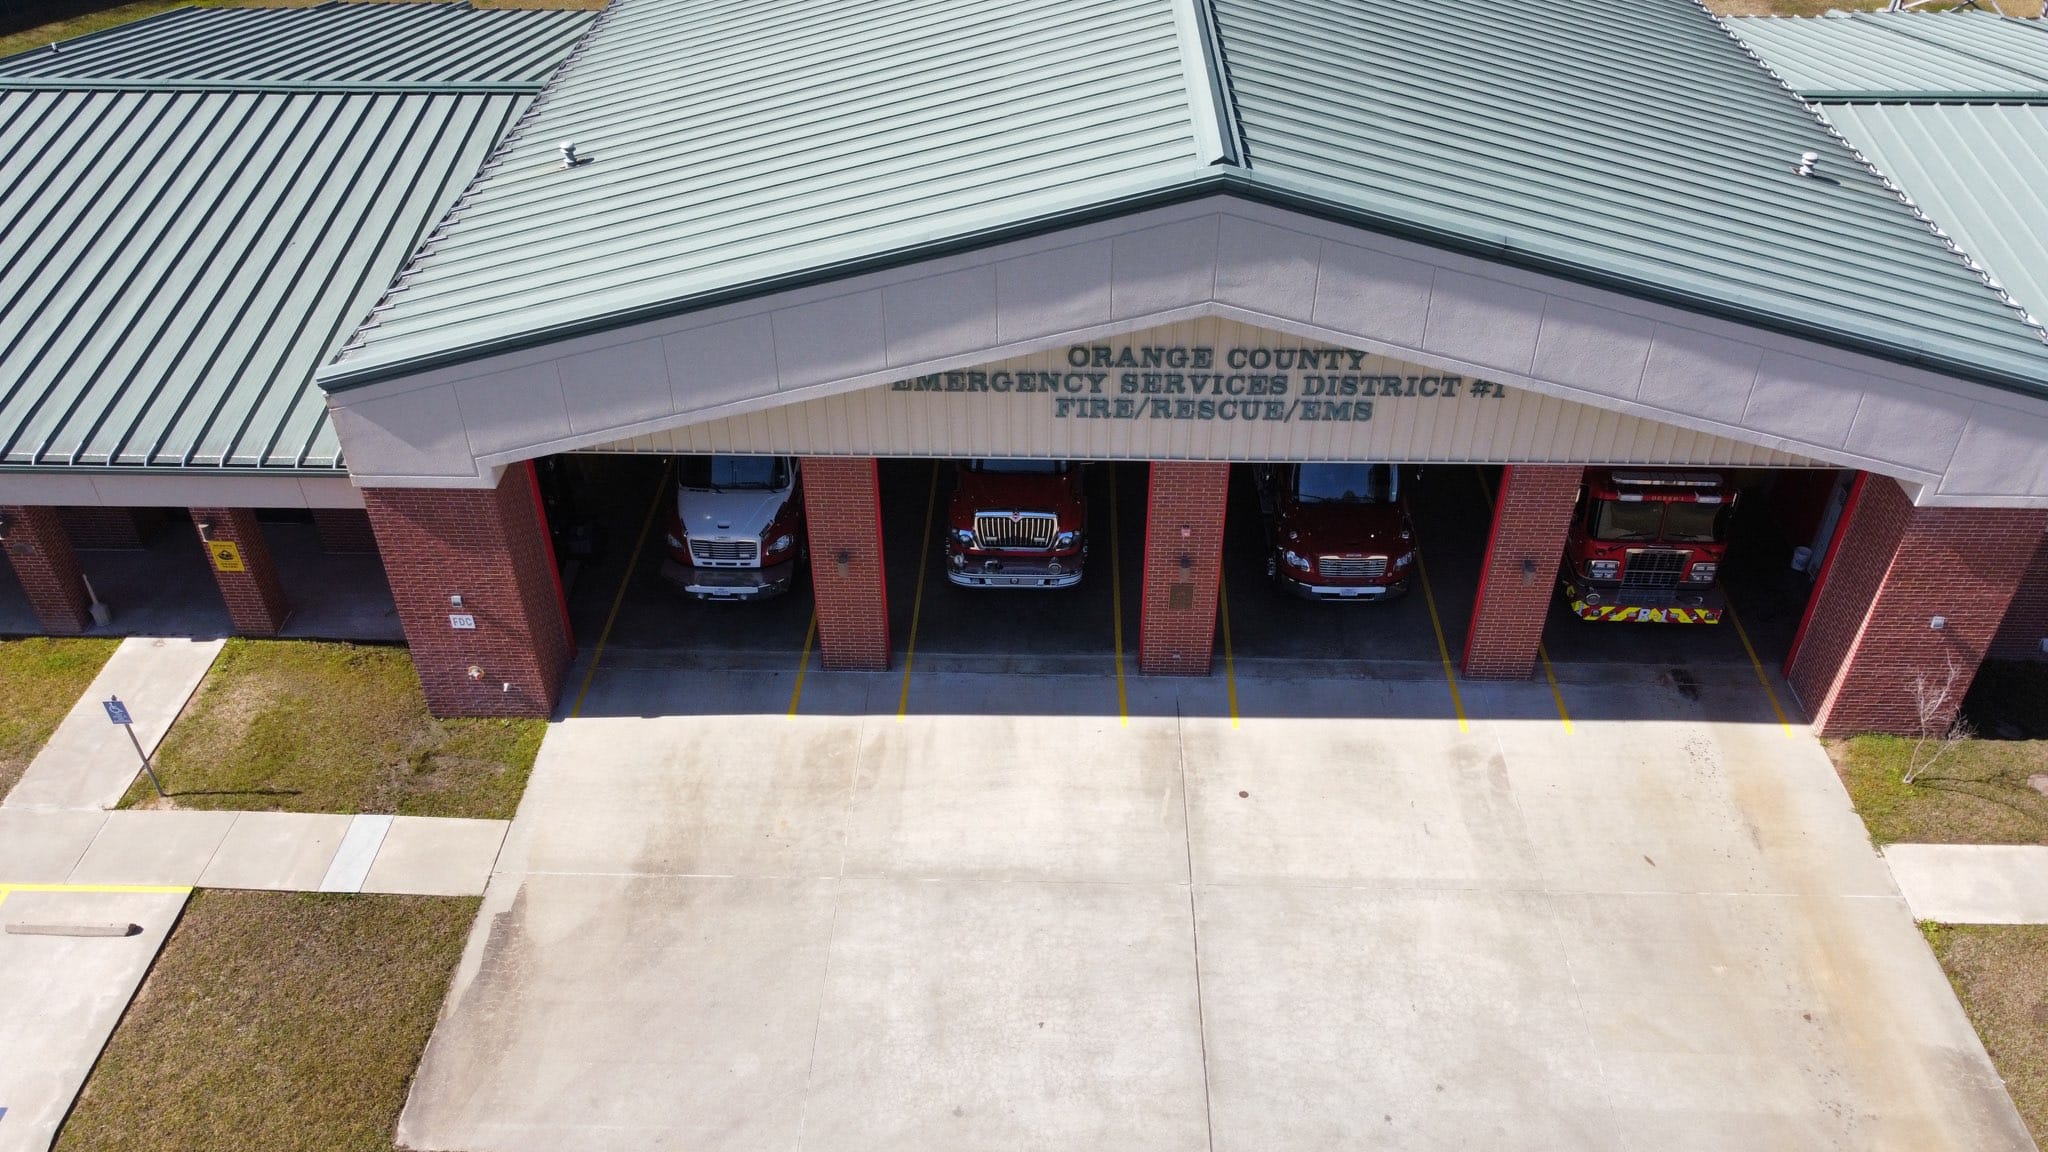 Arial view of the fire station.